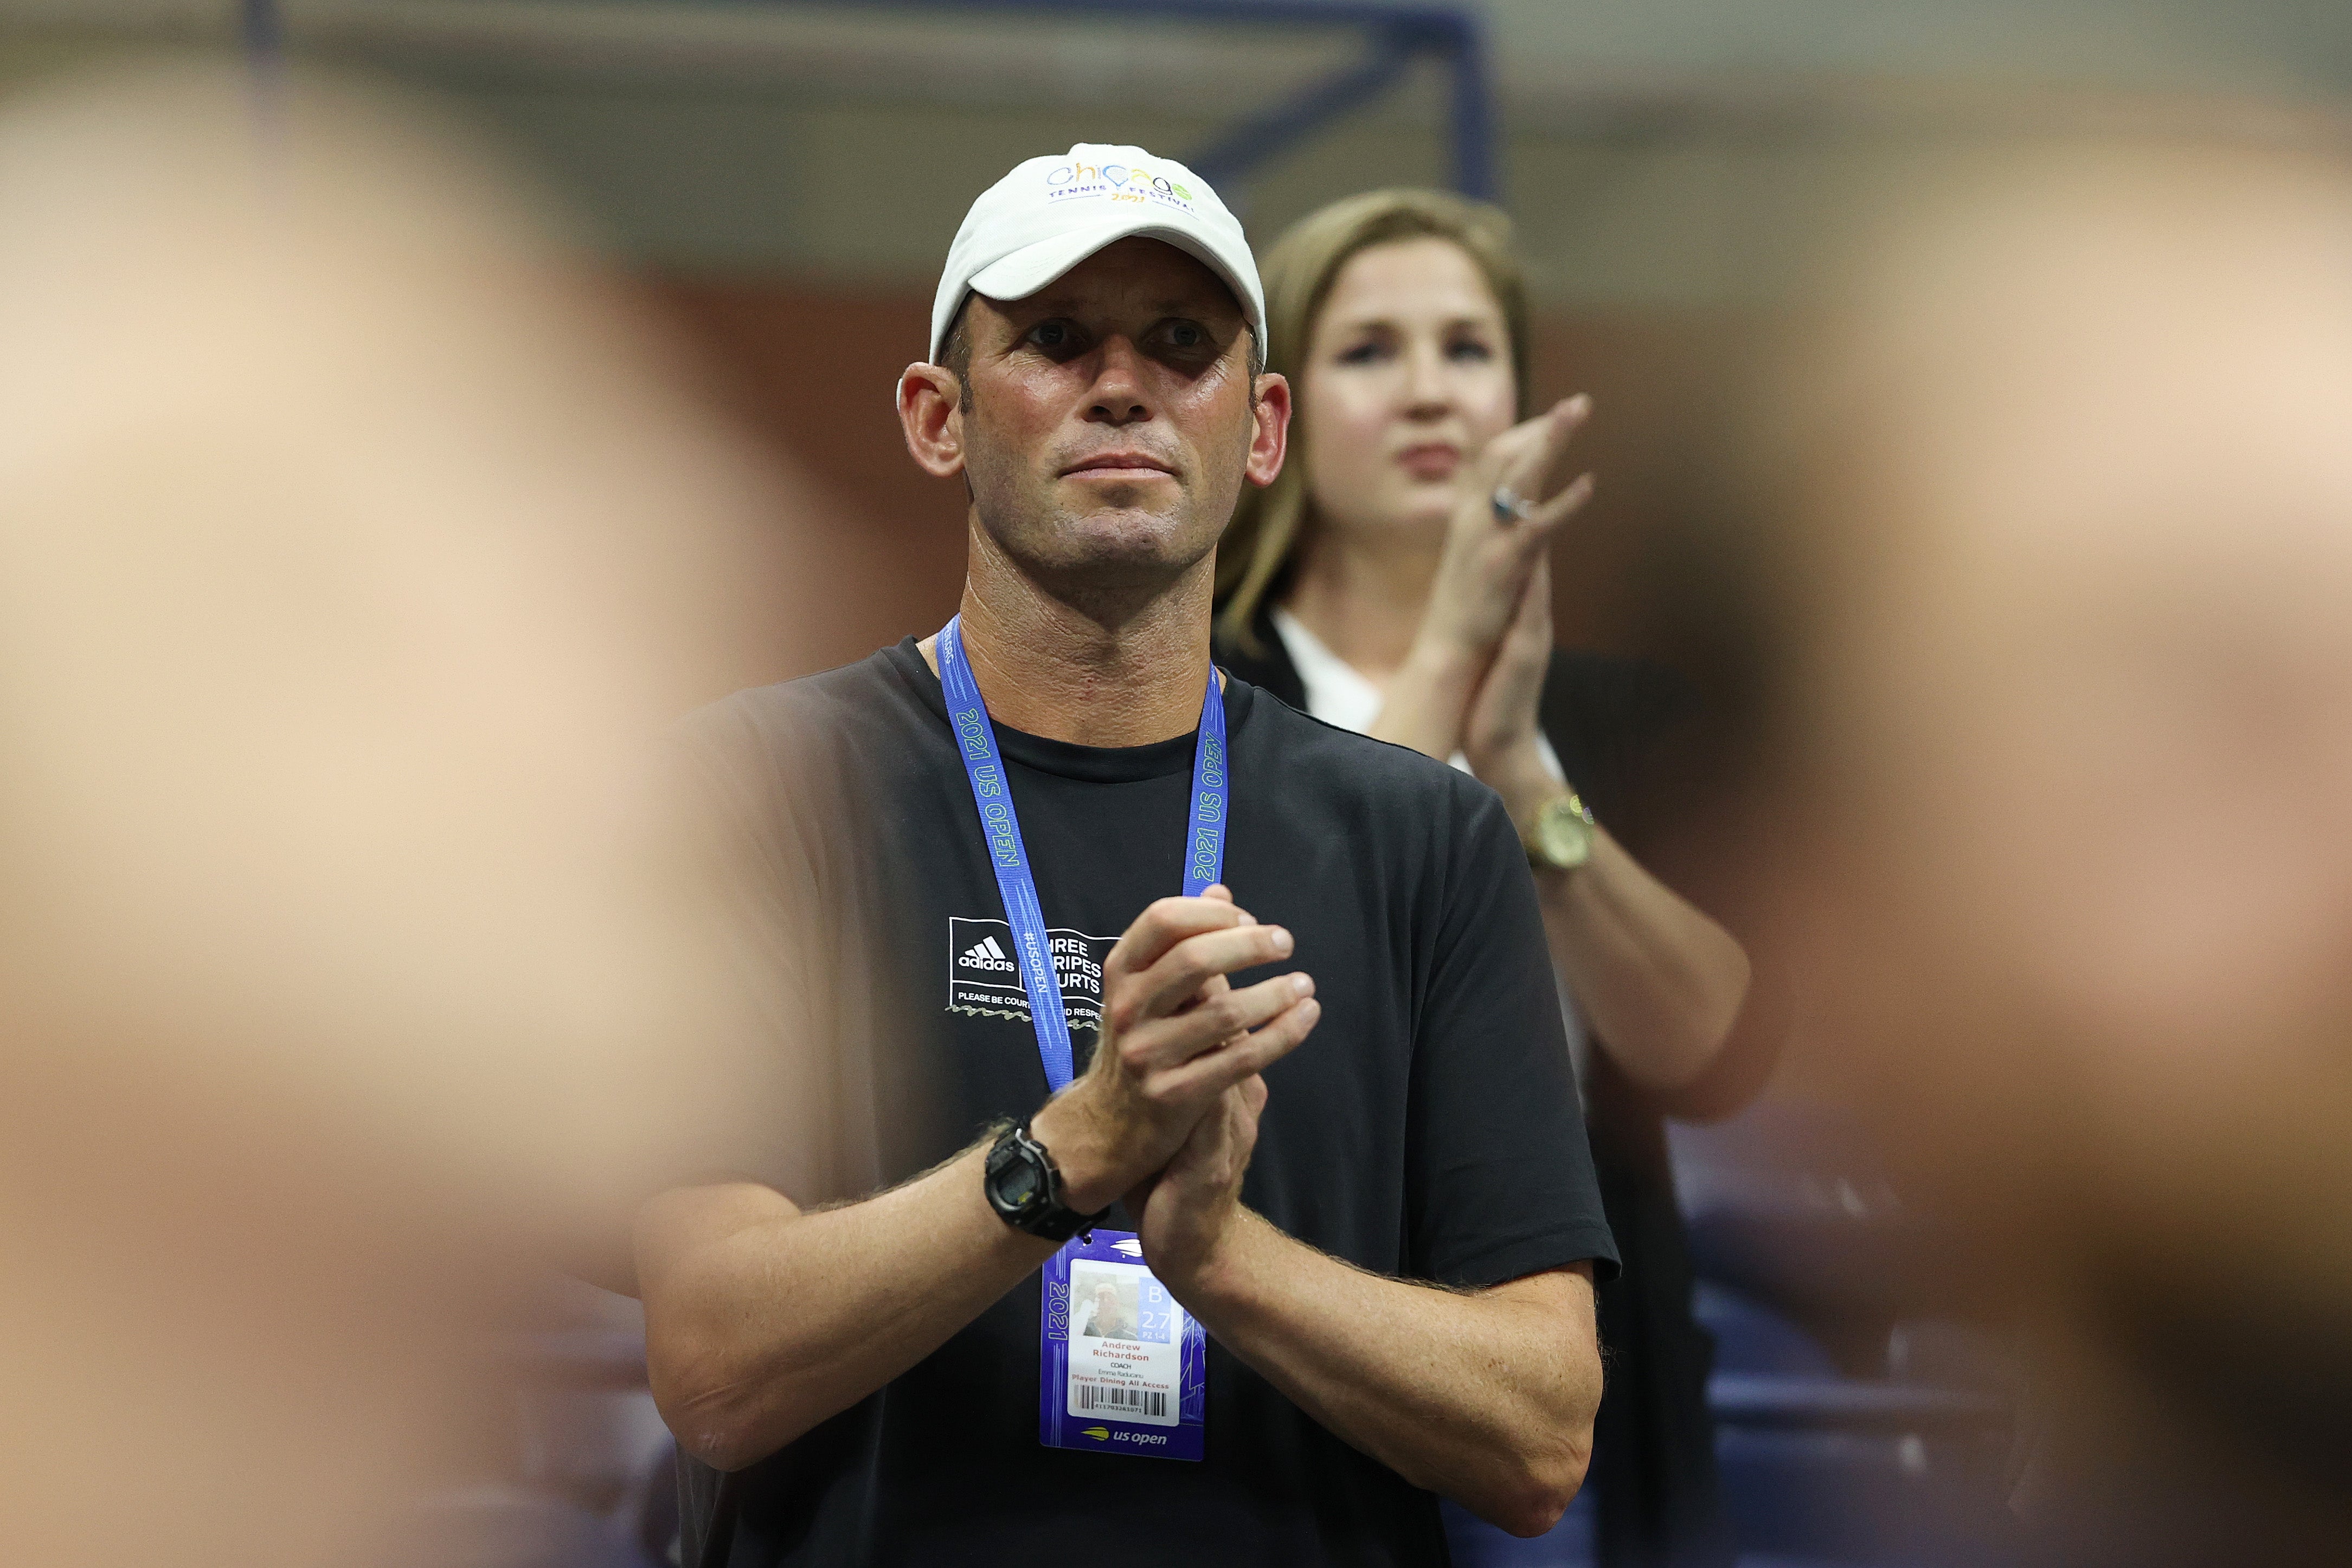 Andrew Richardson, coach of Emma Raducanu of Great Britain, cheers at the US Open